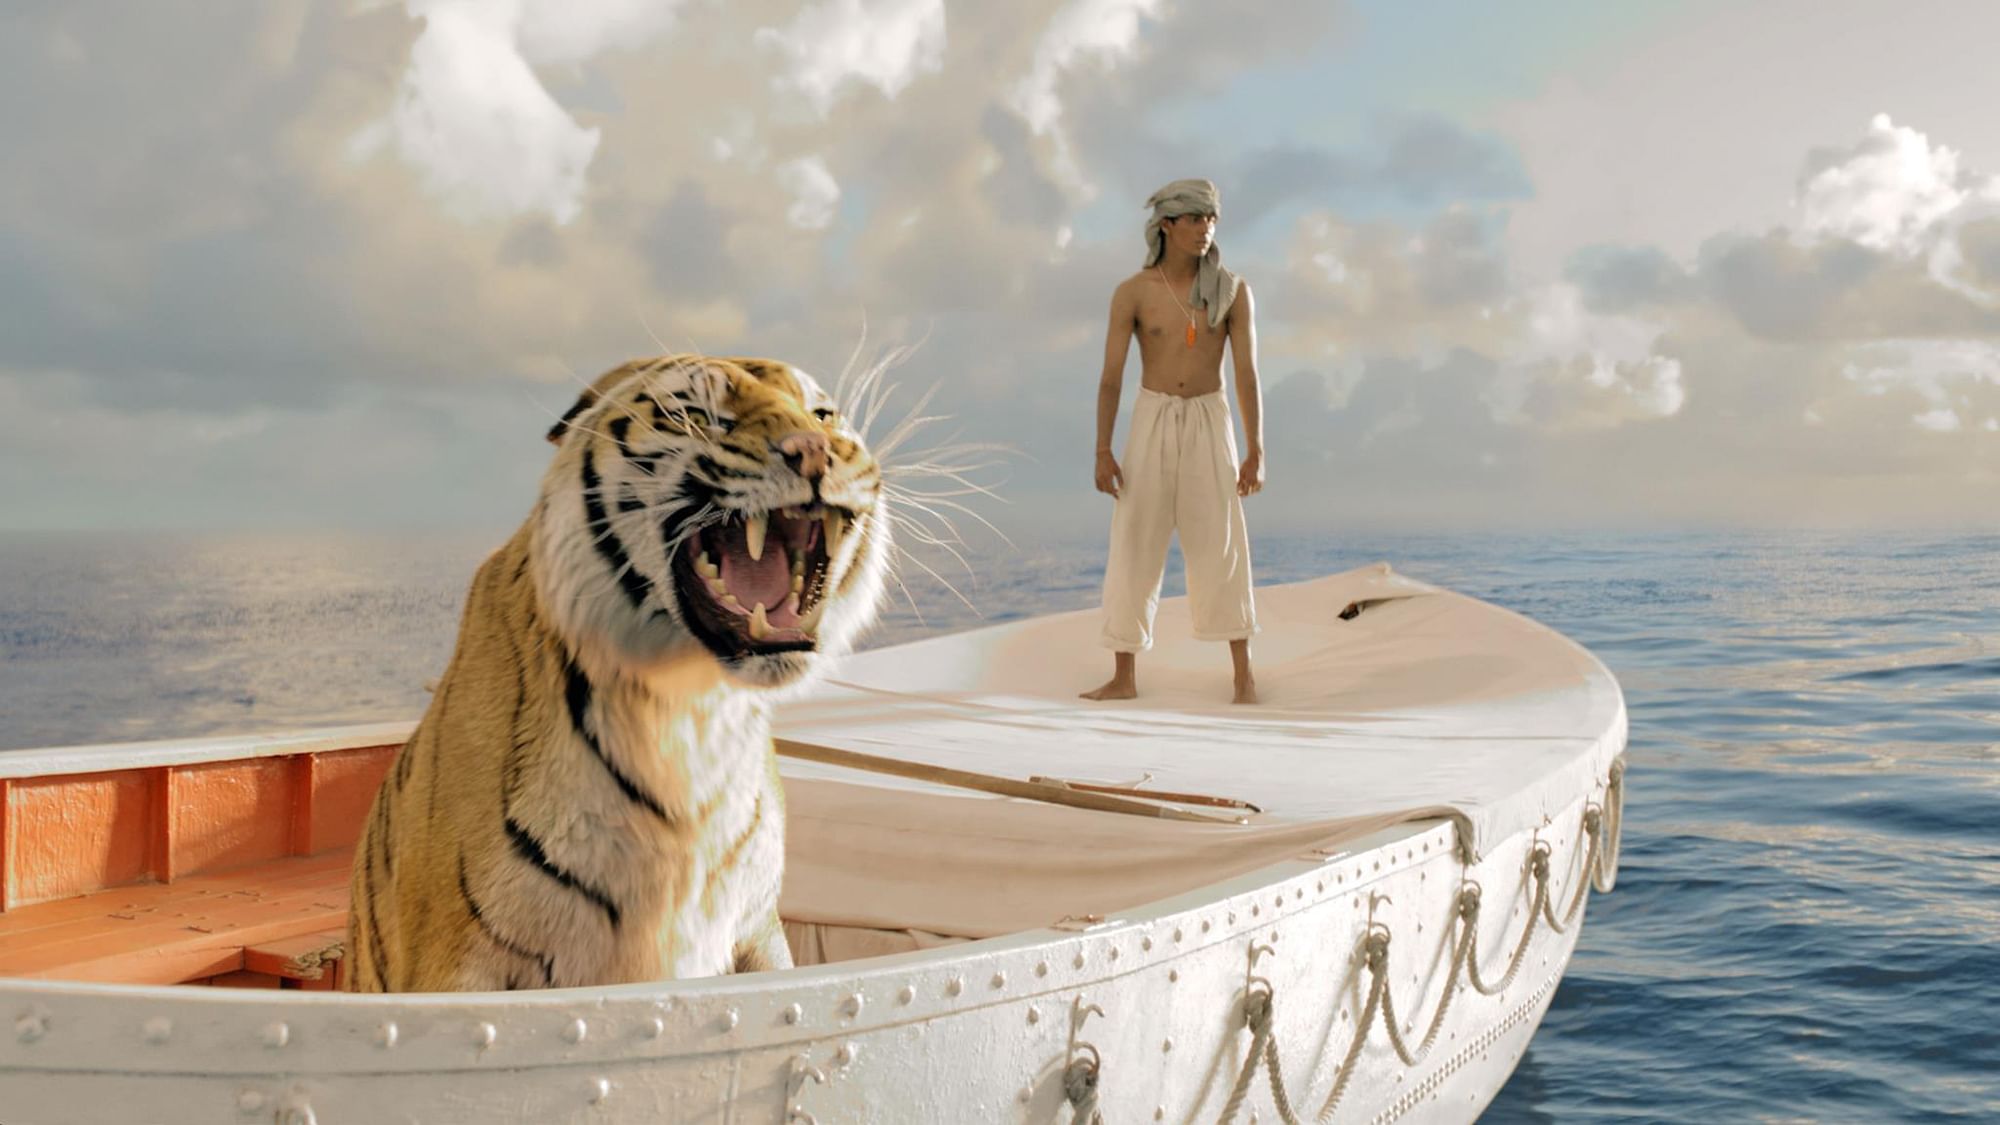 A still from the movie ‘Life of Pi’. (Photo Courtesy: Life of Pi <a href="https://www.facebook.com/LifeofPi/?fref=ts">Facebook Page</a>)